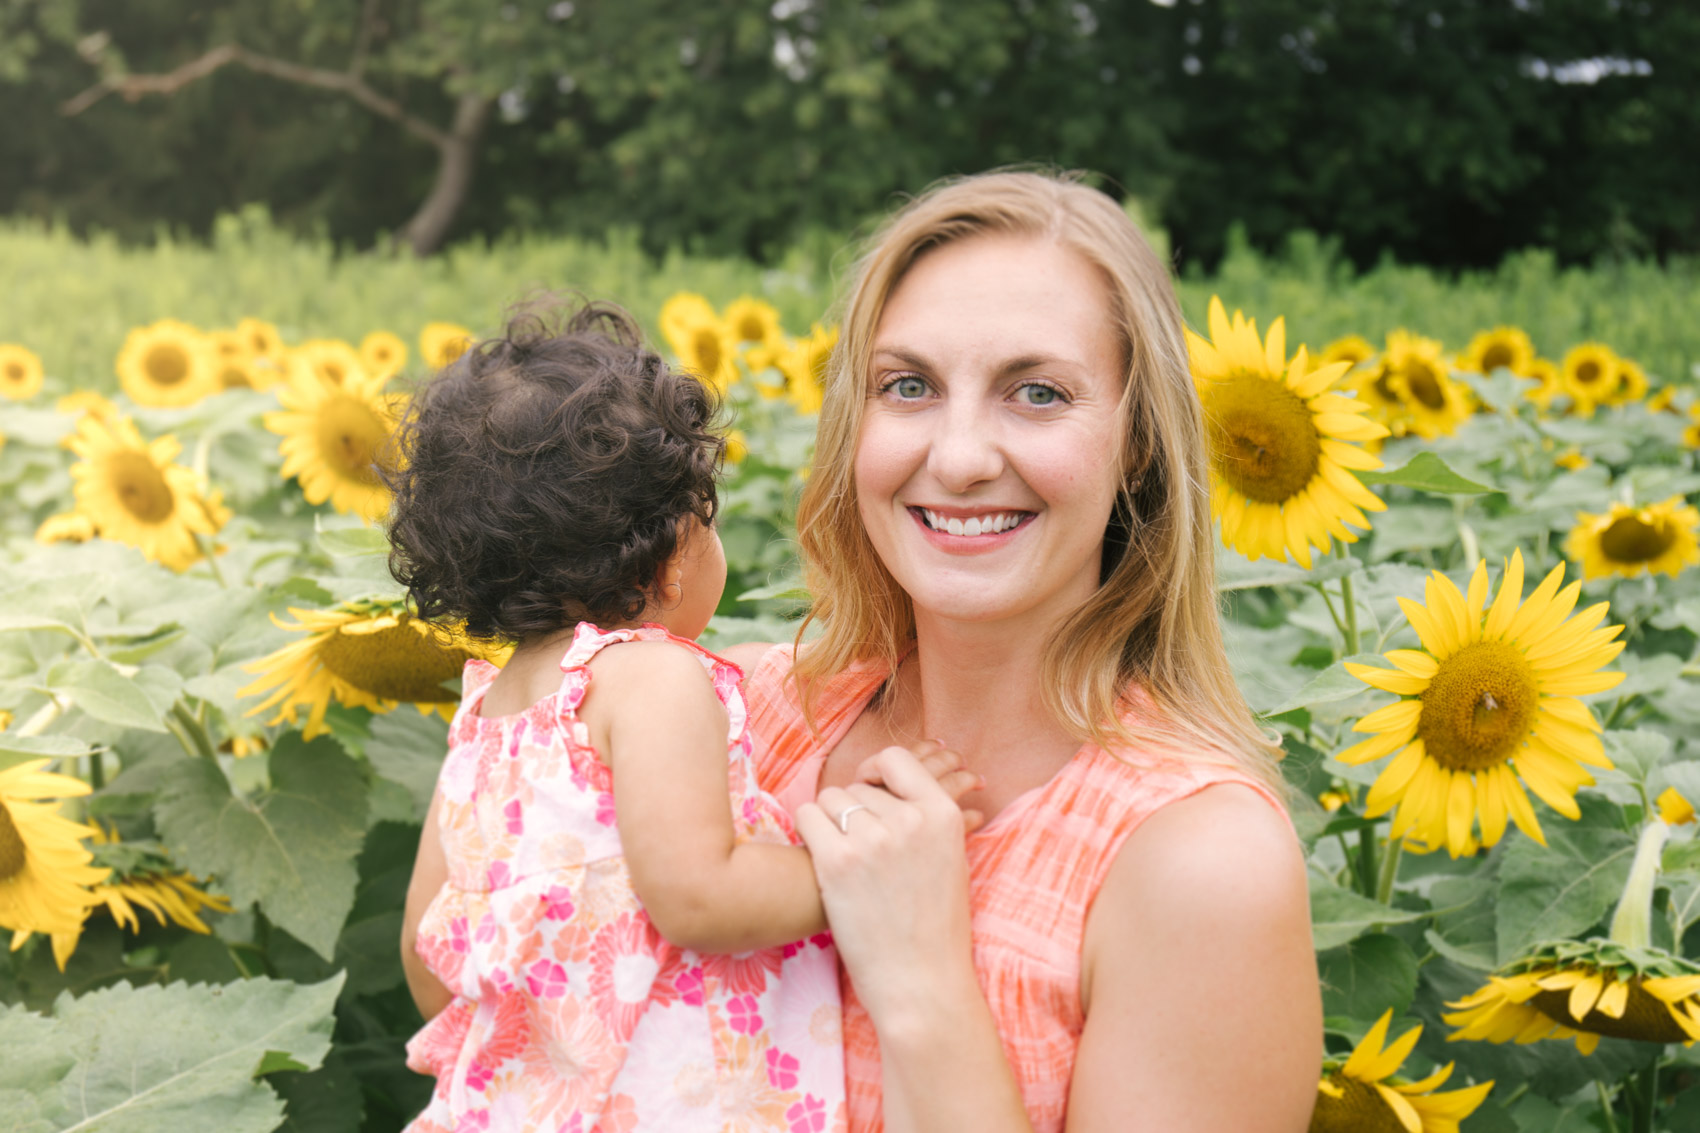 sunflower field photoshoot family outfit ideas | what to wear for sunflower field photos | coral maxi dress sunflower field casual outfit